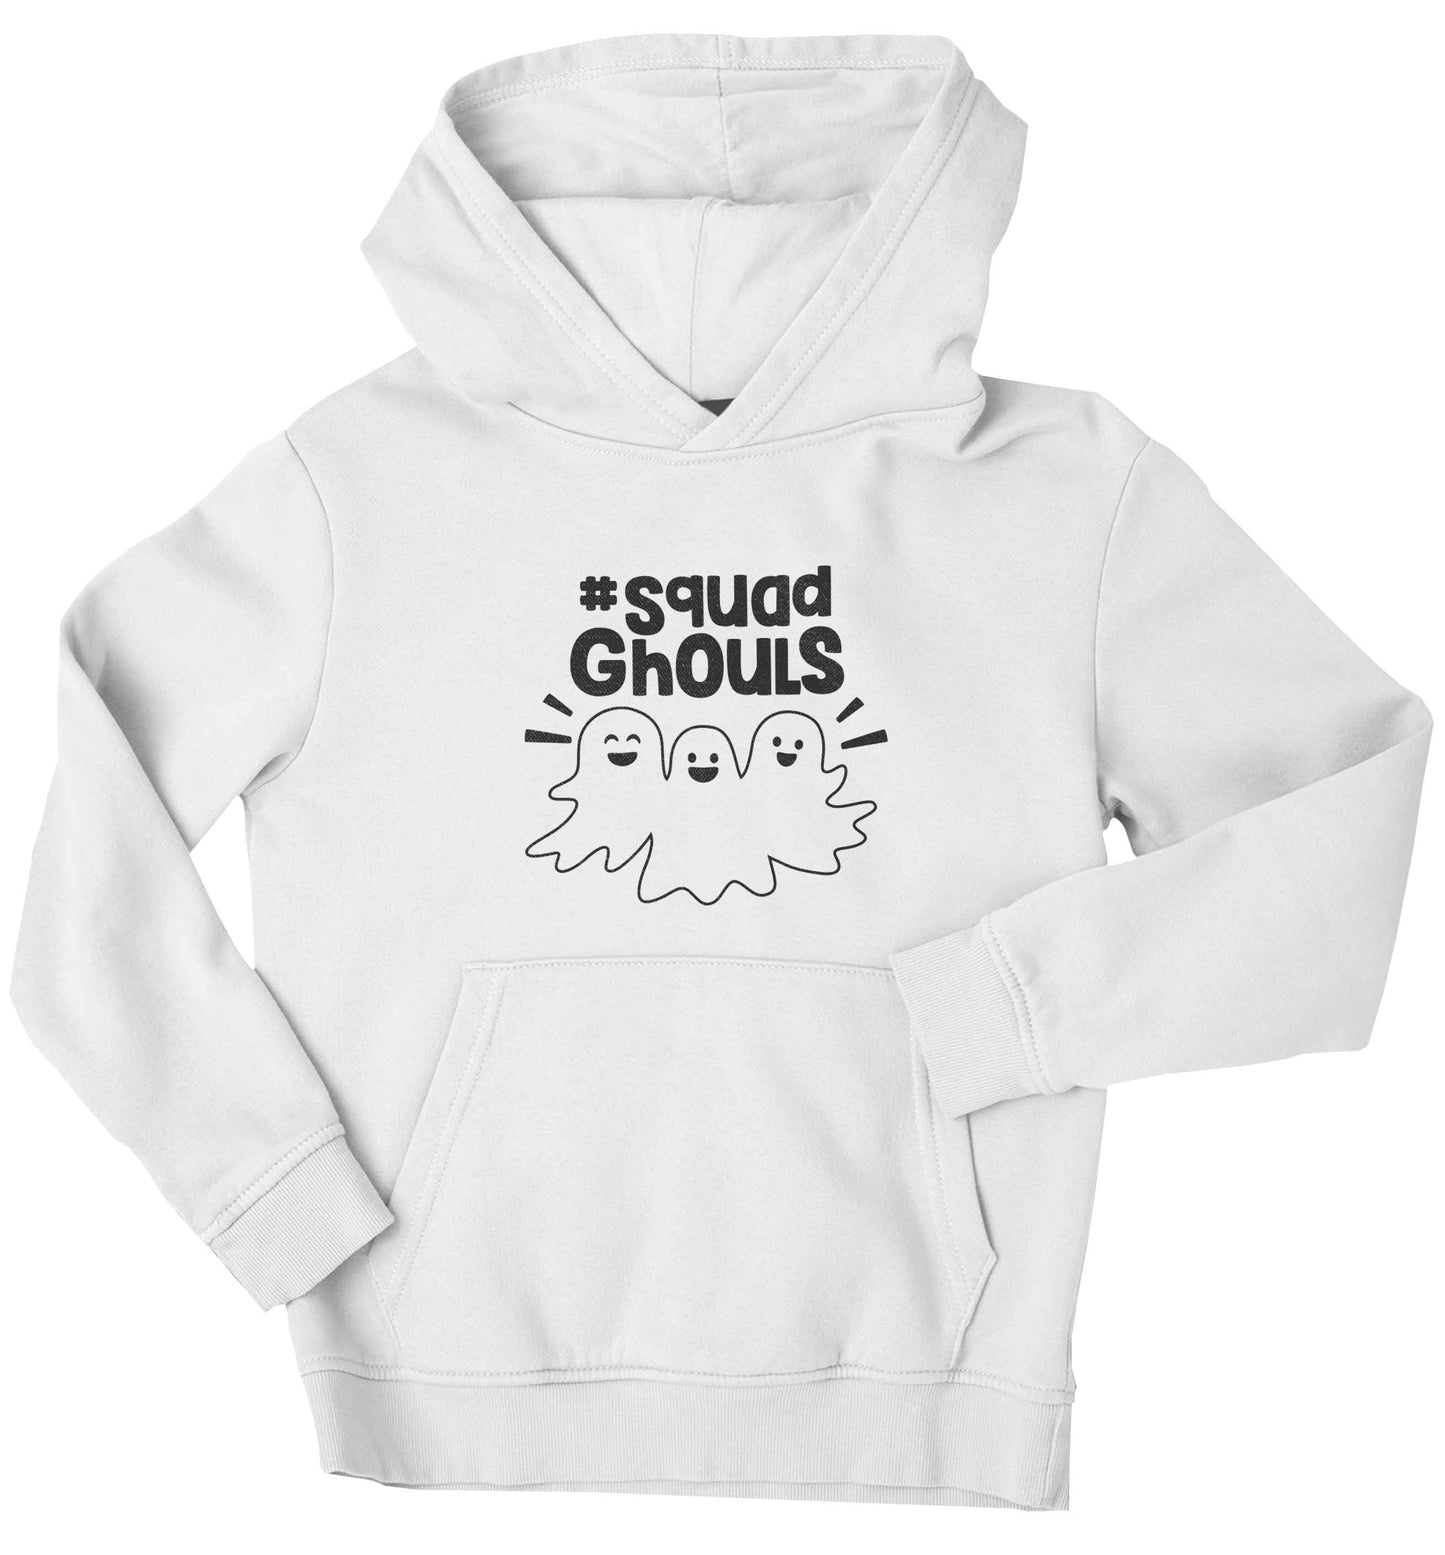 Squad ghouls Kit children's white hoodie 12-13 Years